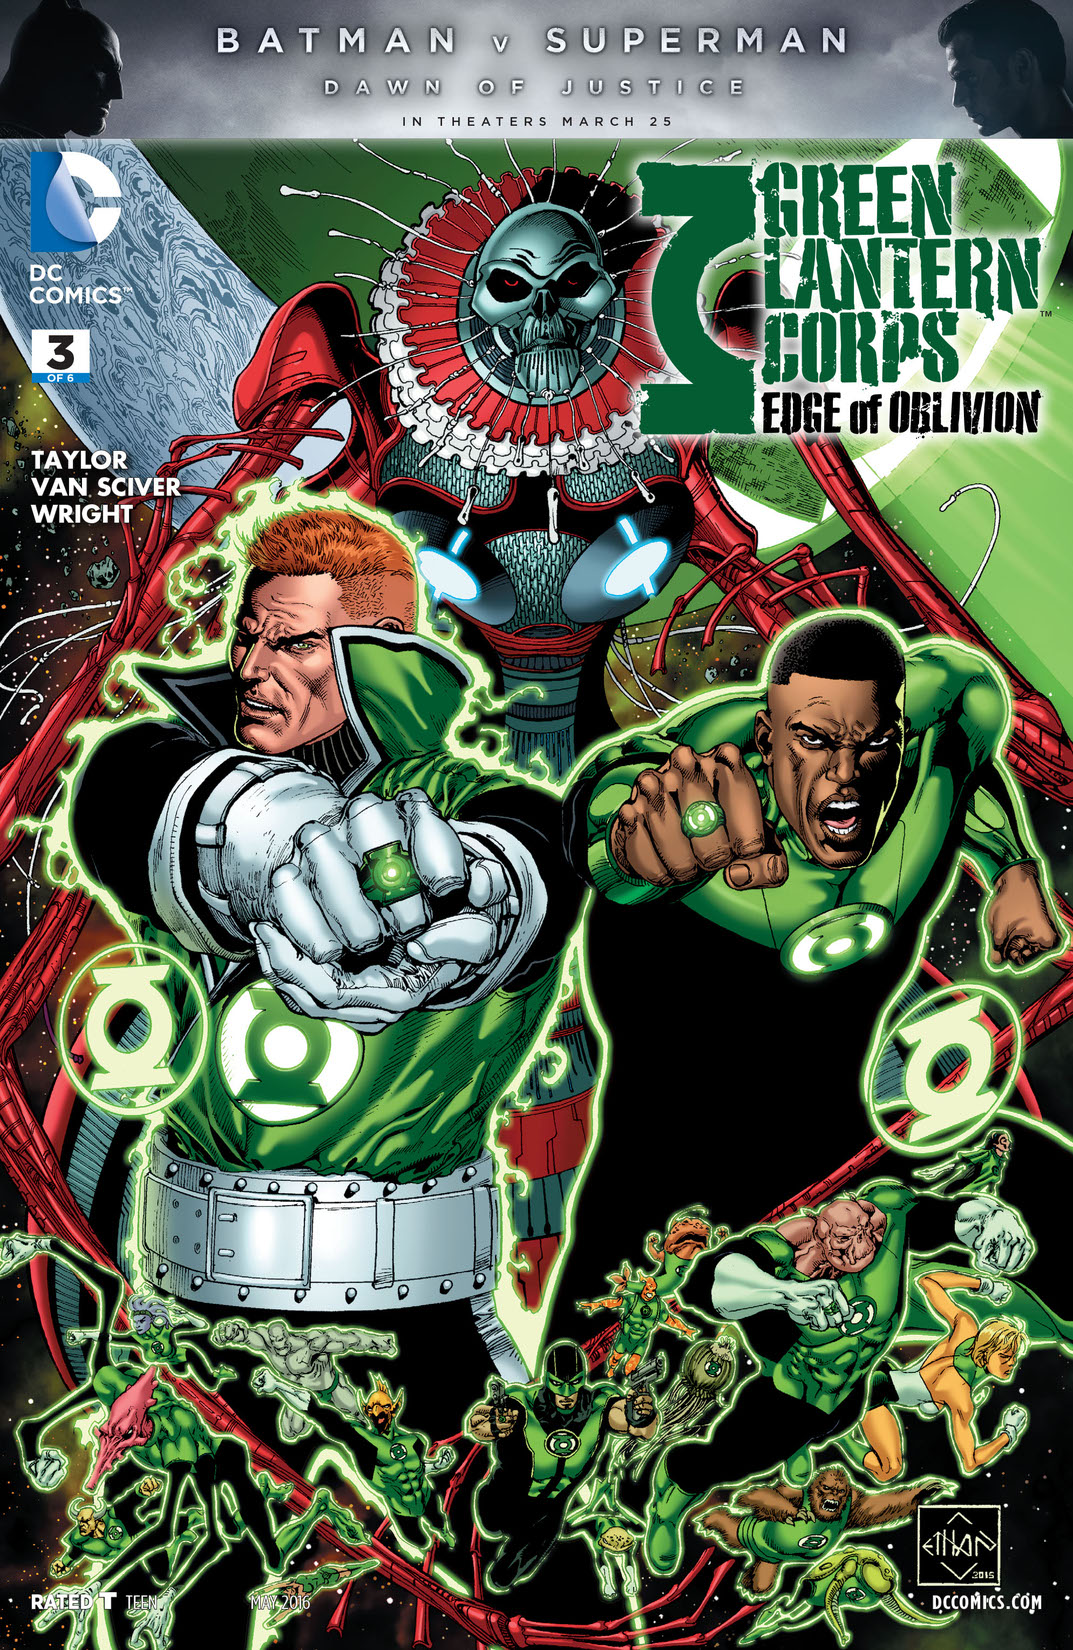 Green Lantern Corps: Edge of Oblivion #3 preview images